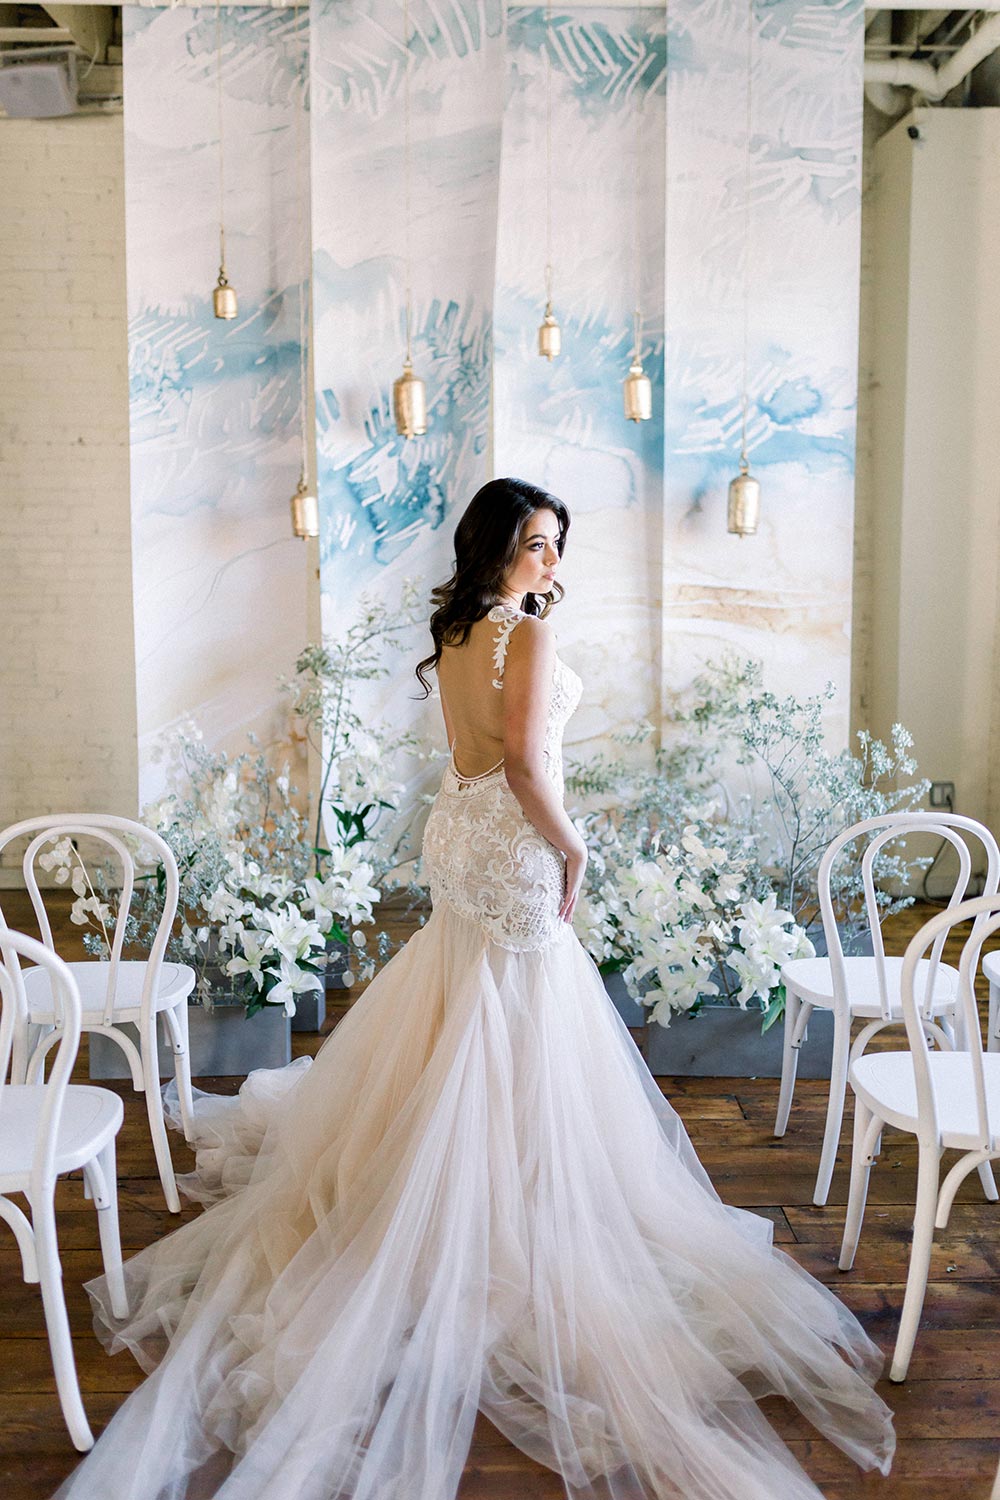 watercolor mural ceremony backdrop with wind chimes and bride in mermaid wedding dress